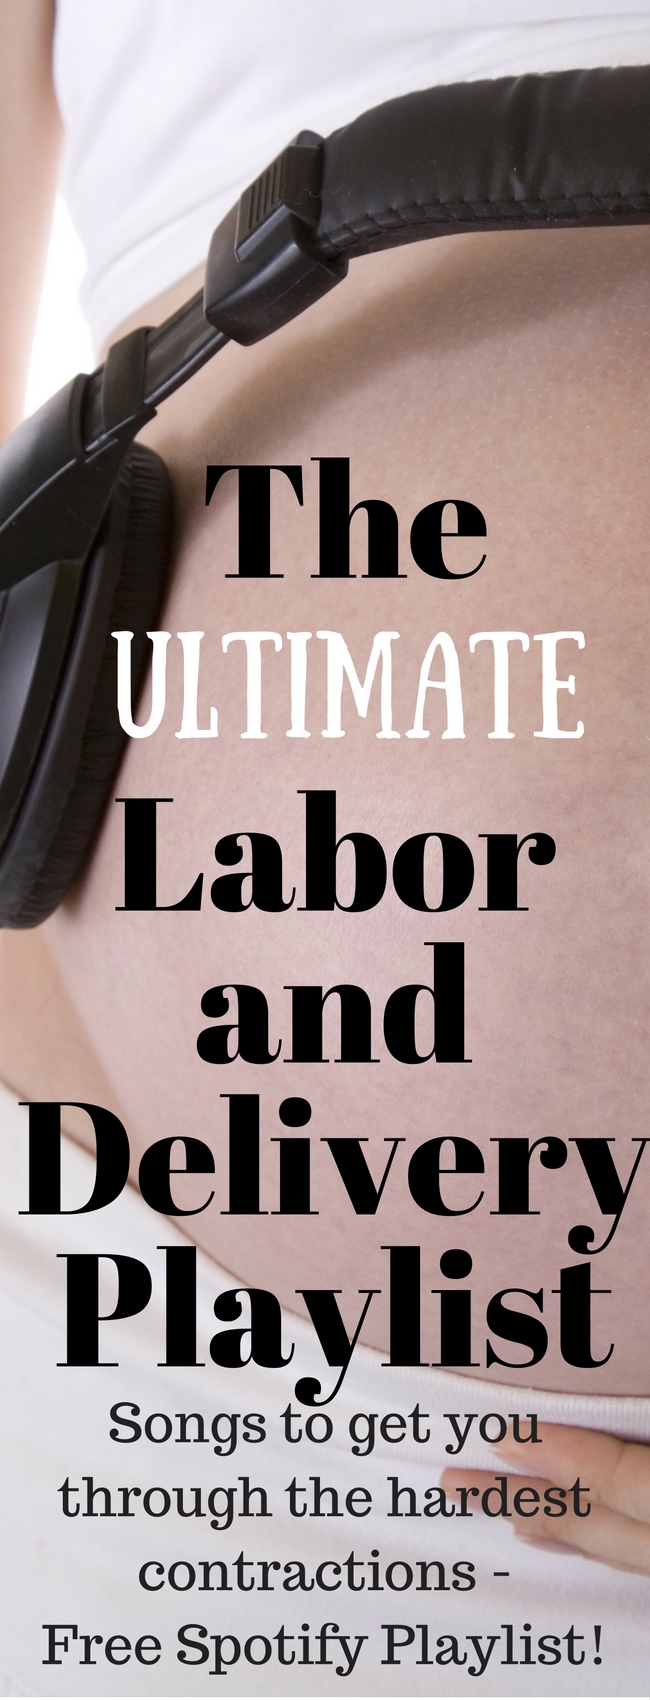 labor-and-delivery-playlist